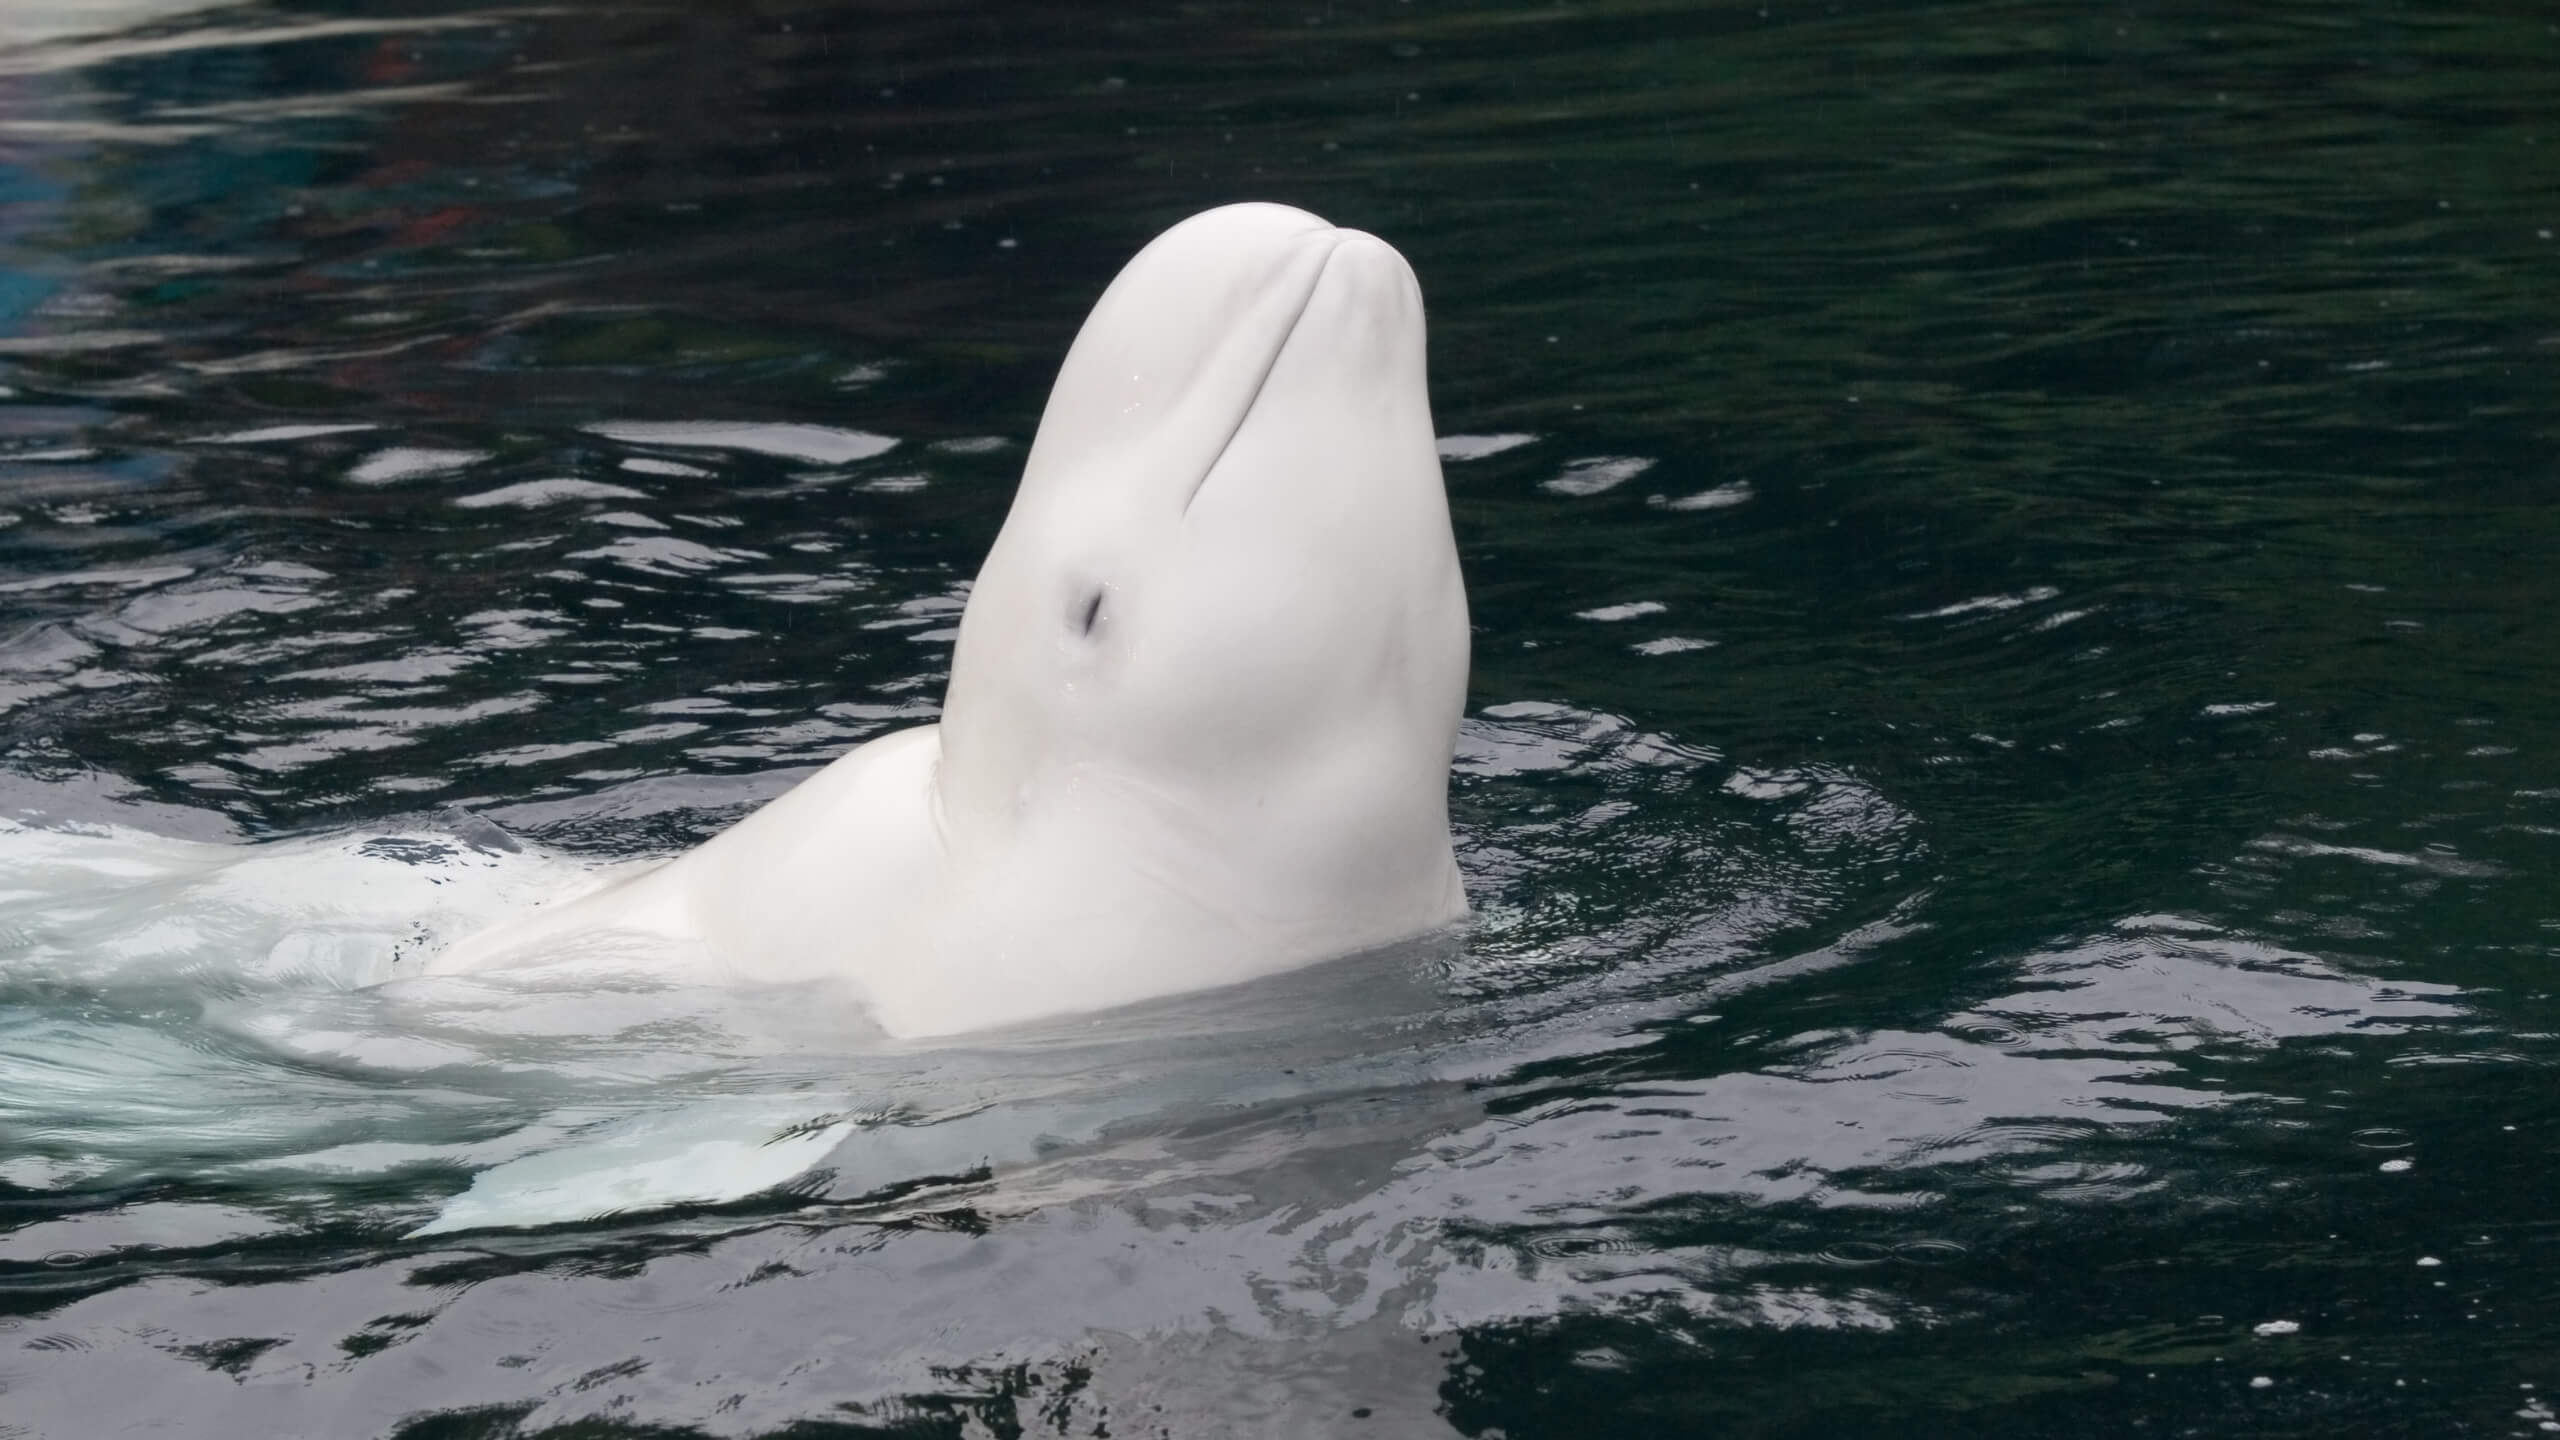 Belugas typically hunt for food during the day but can be seen feeding at night too if there is enough light available from moonlight or bioluminescence from planktonic organisms in the water column.